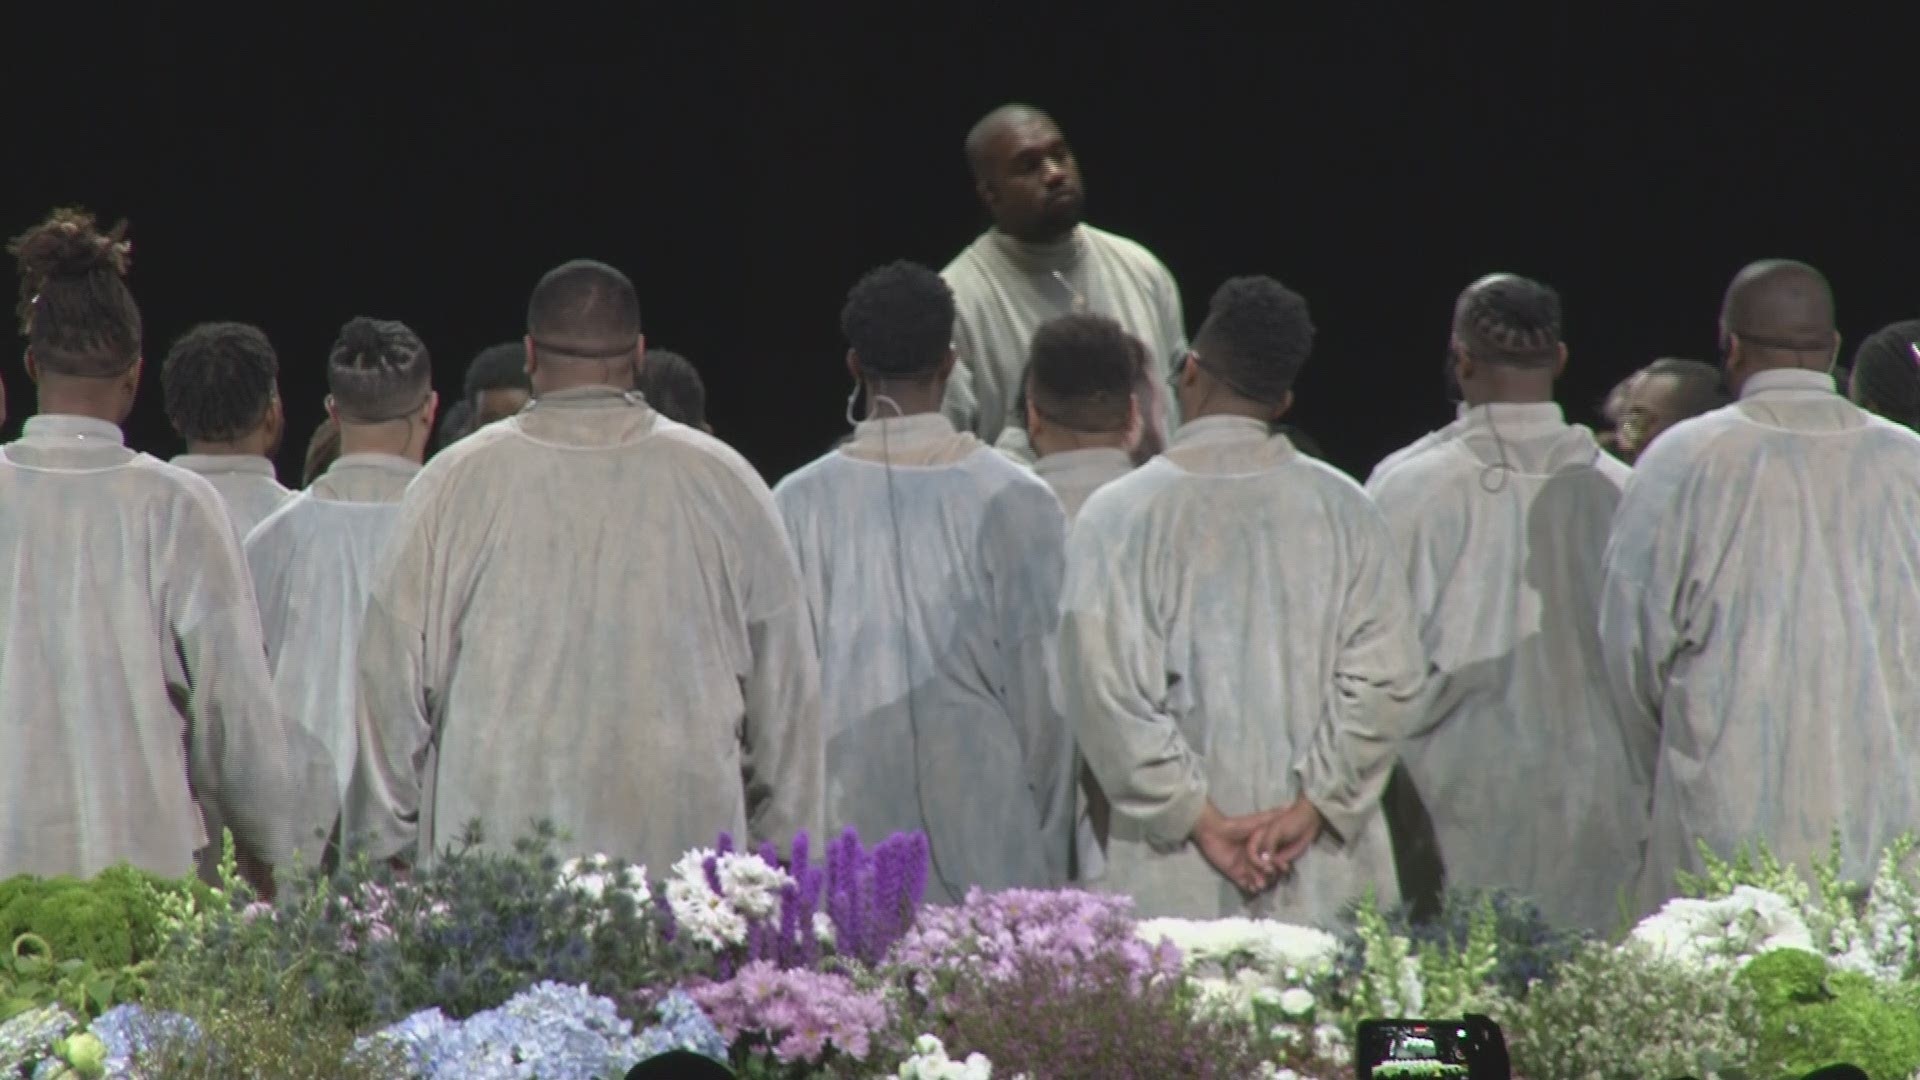 Kanye West performed at the Christian youth conference "Strength to Stand" in Pigeon Forge, attended by around 17,000 people.